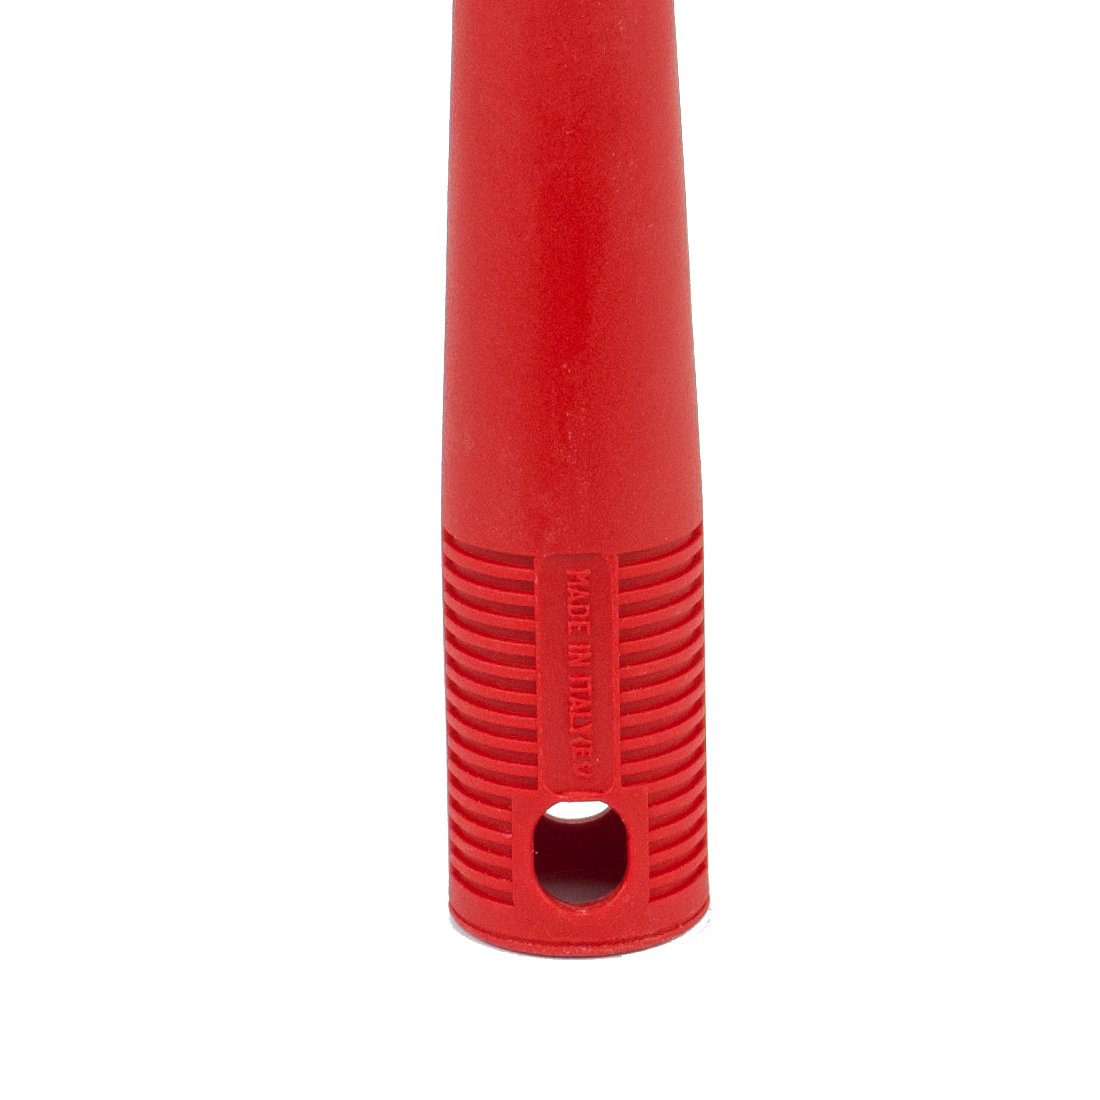 Basics Silicone Hot Skillet Handle Cover Holder Red